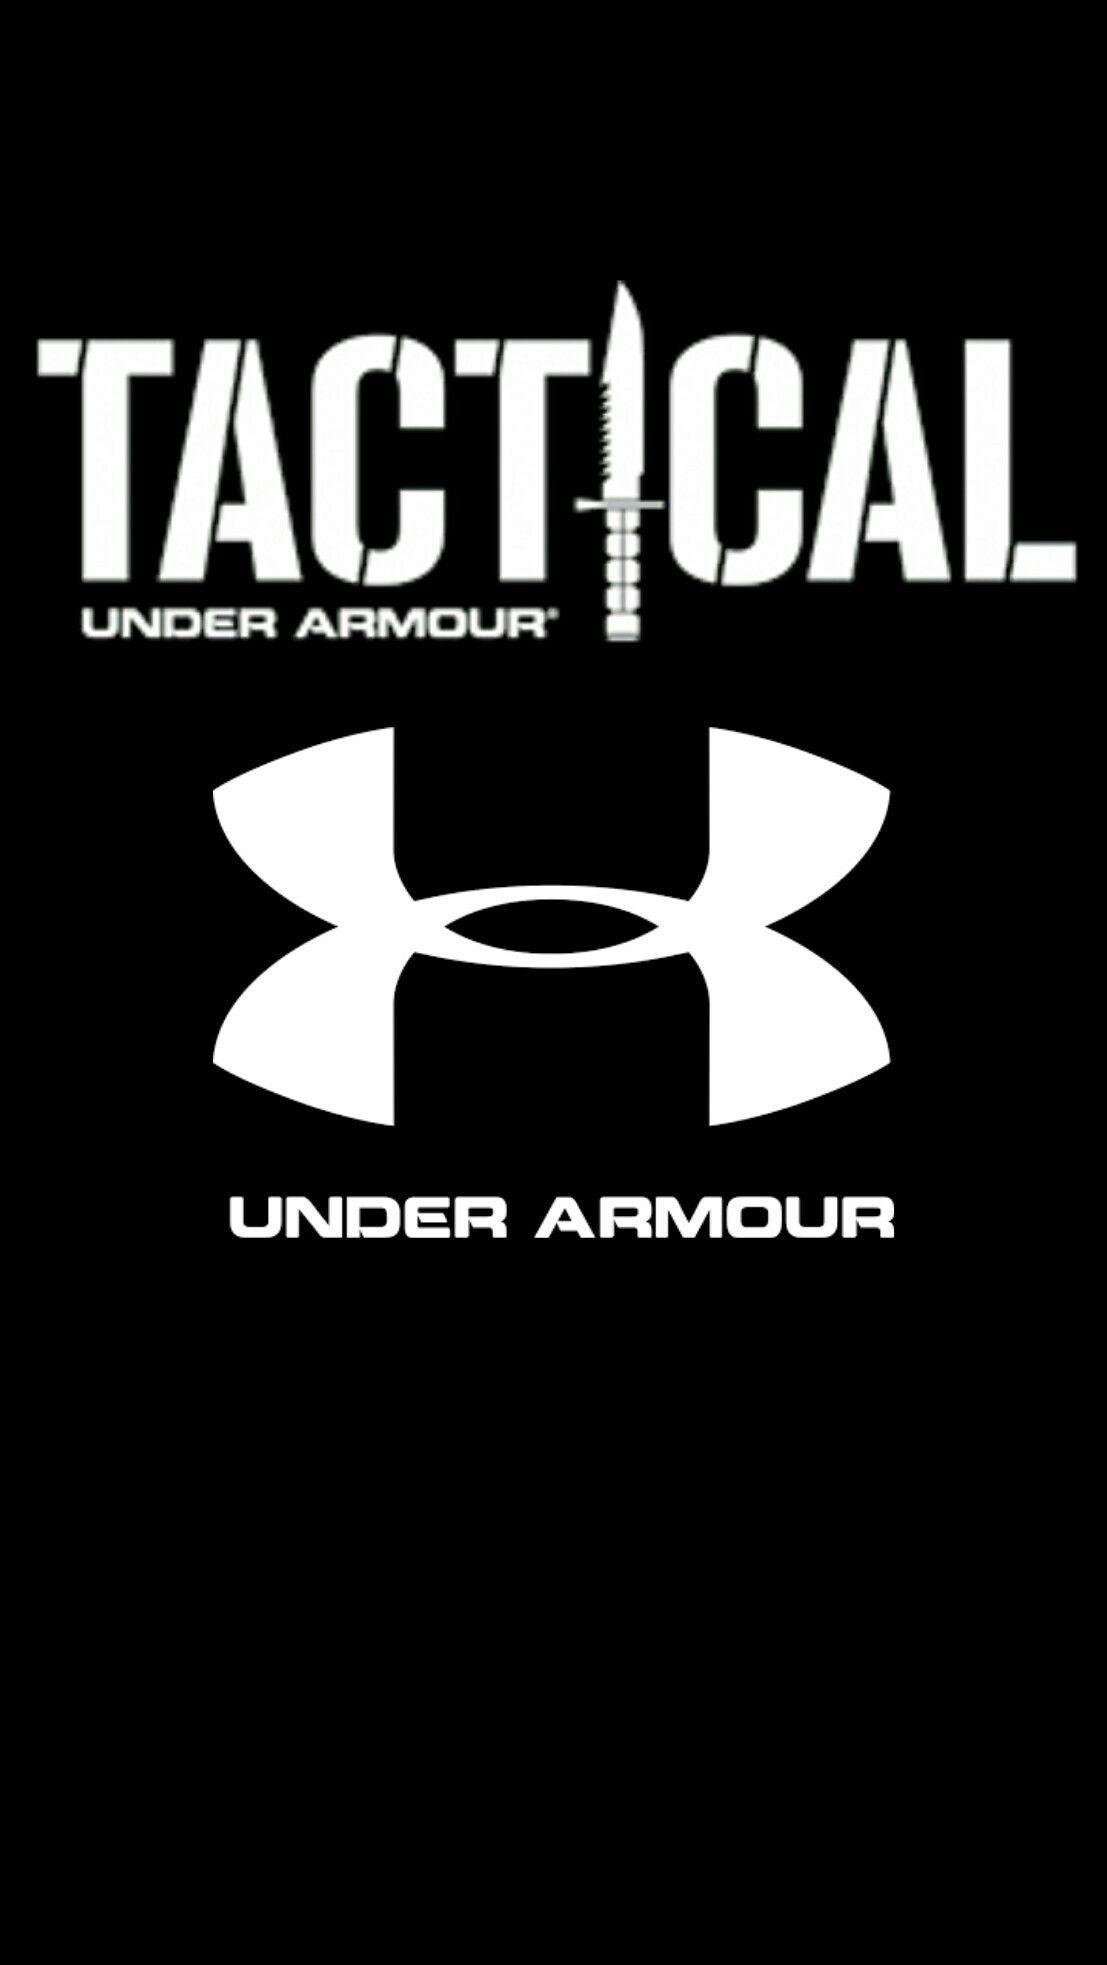 Under Armour Mobile Wallpaper. Beautiful image HD Picture